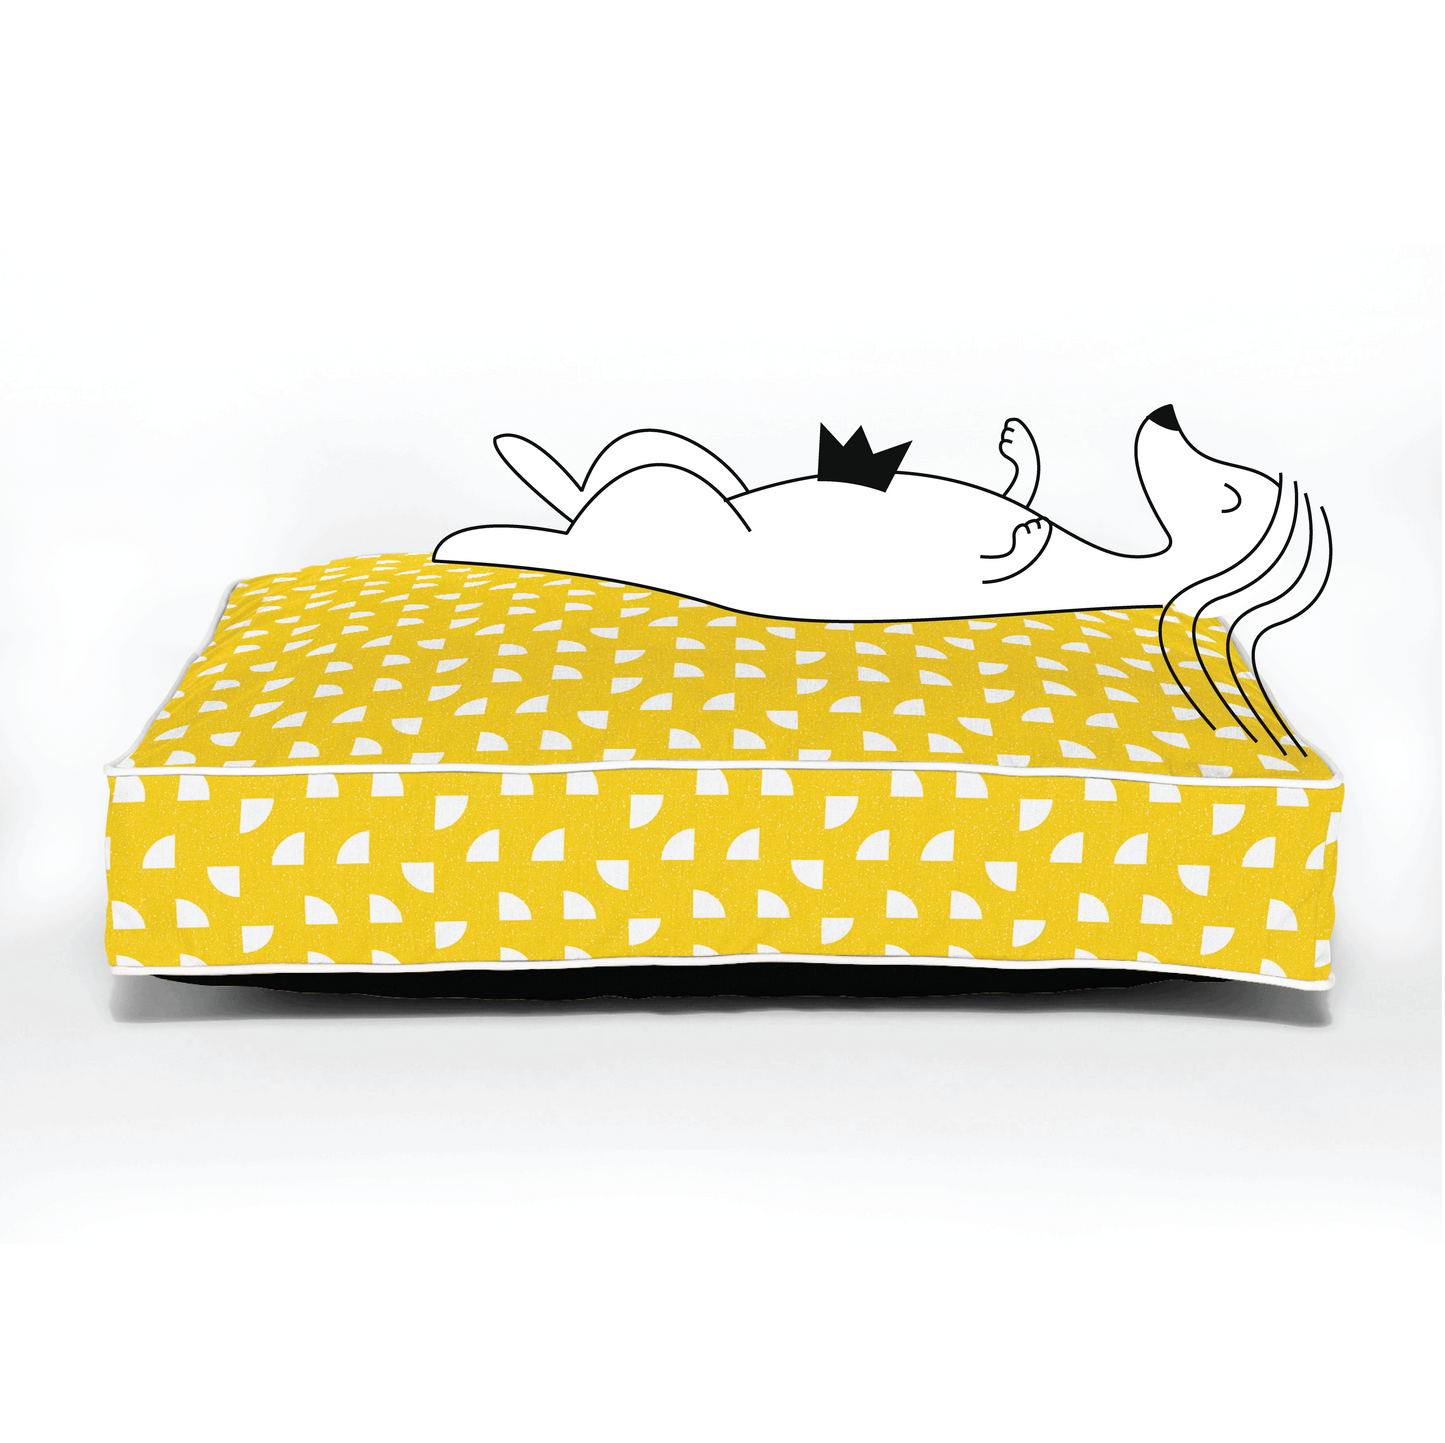 patterned playful chic cool dog bed yellow white